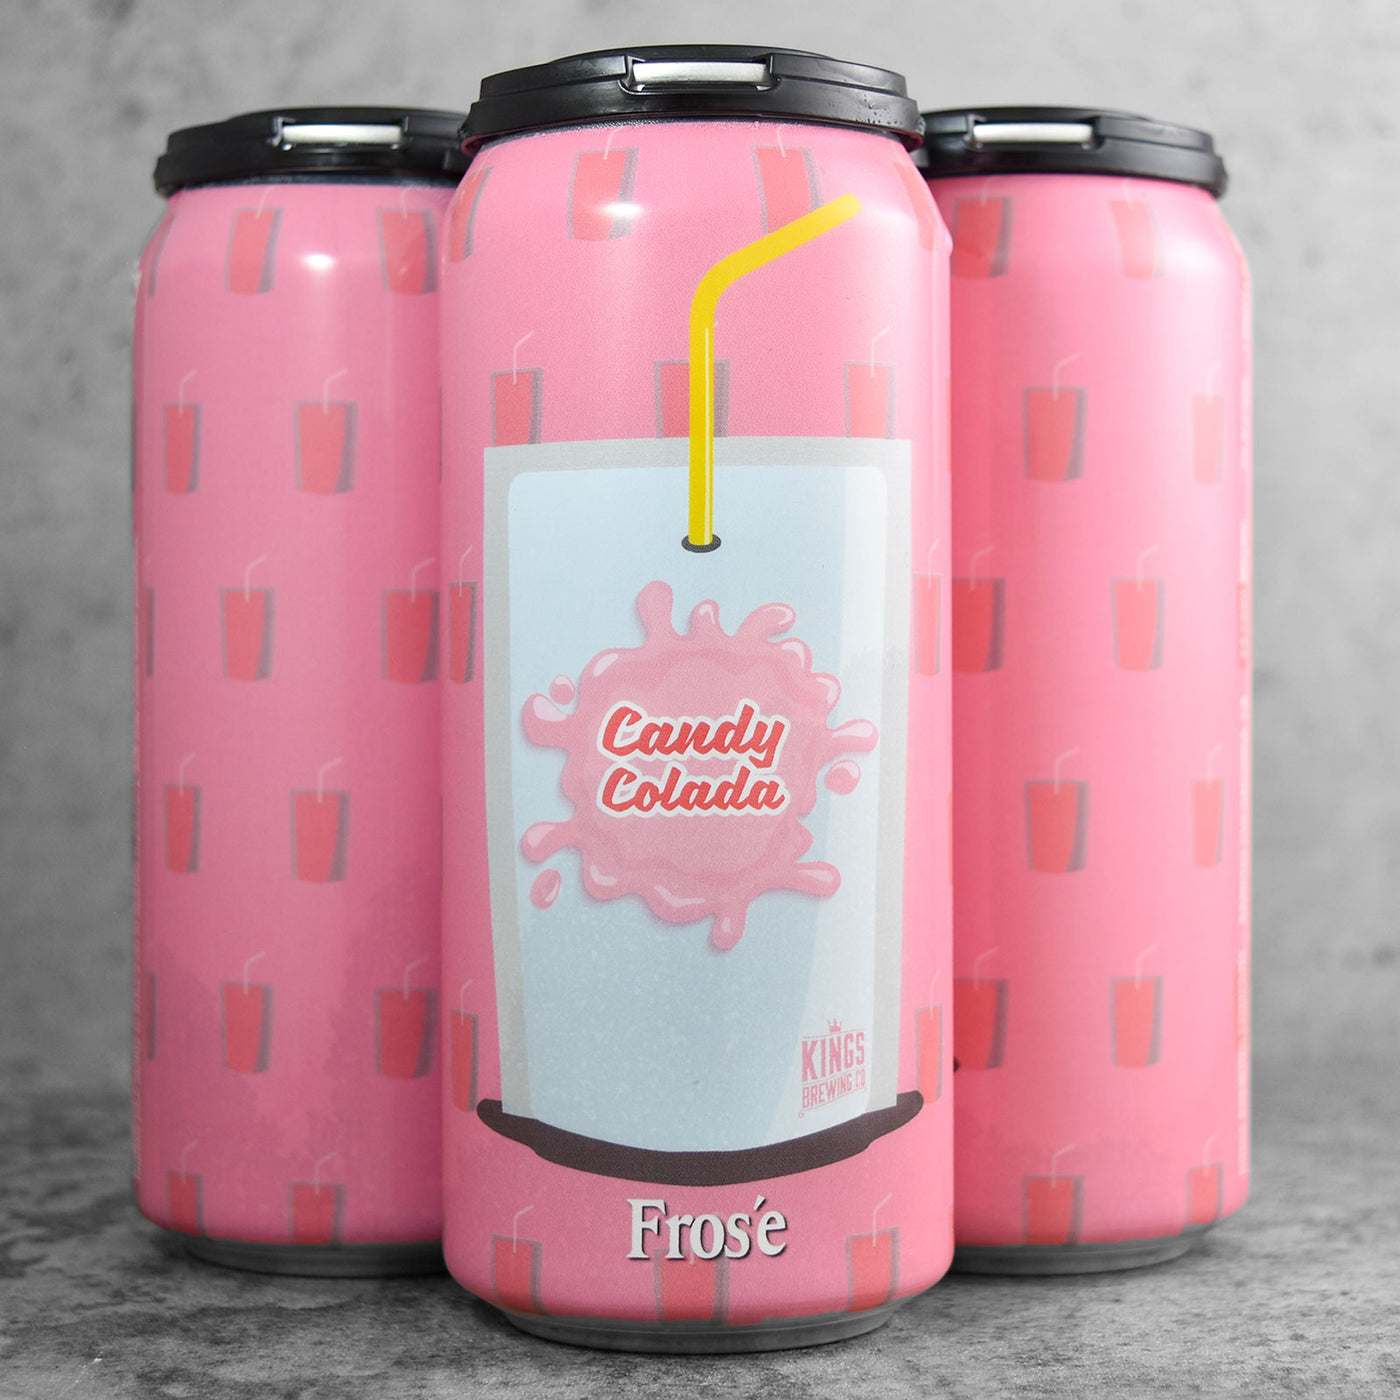 Kings Frosé Candy Colada